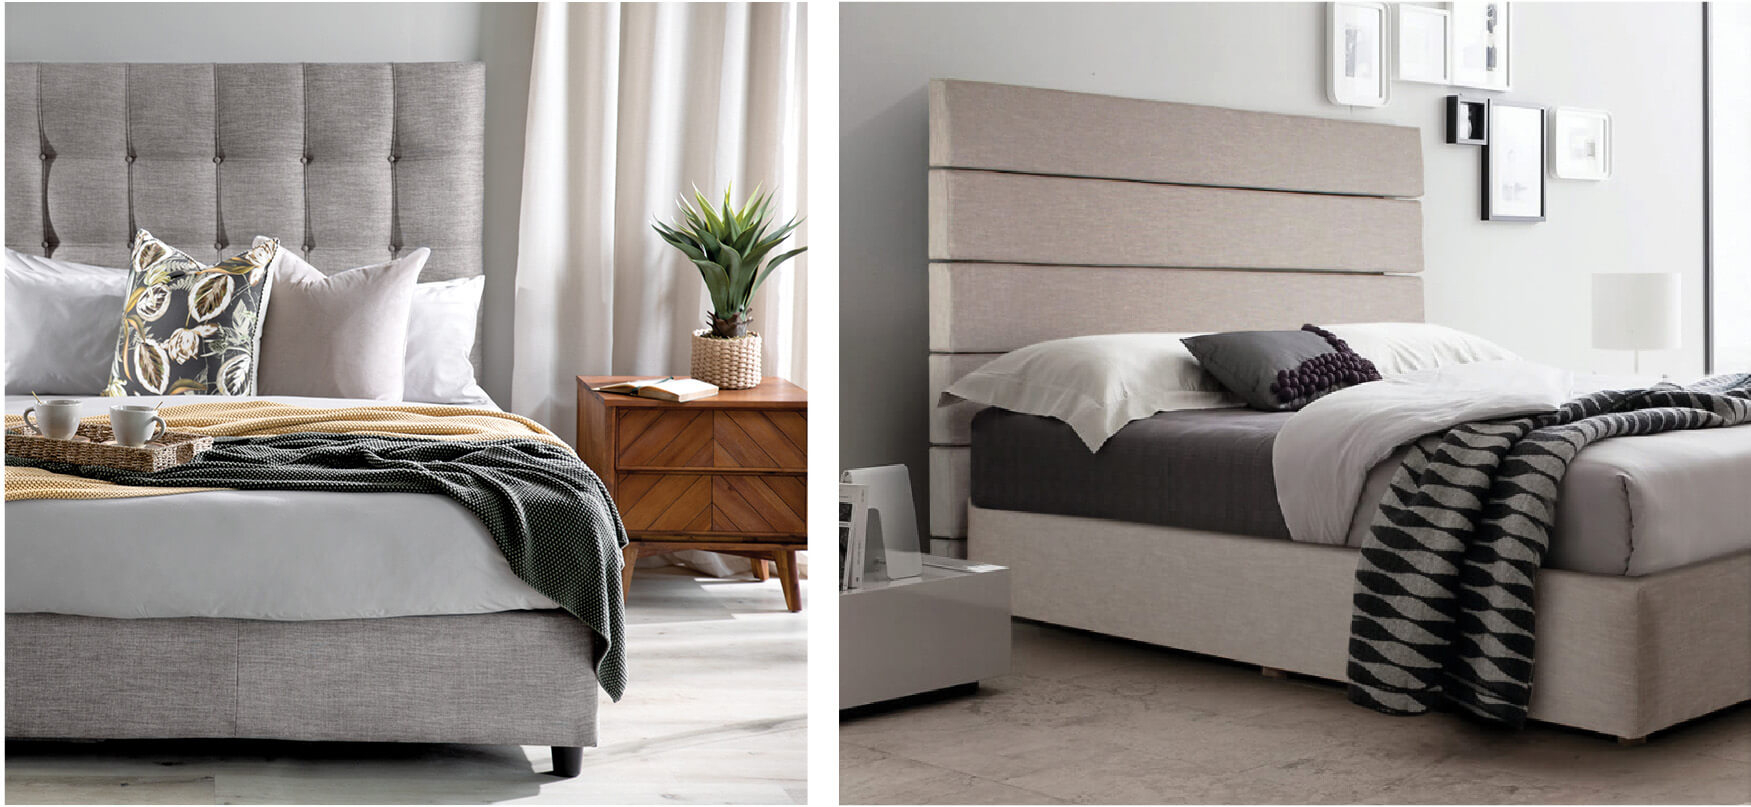 beds and headboards